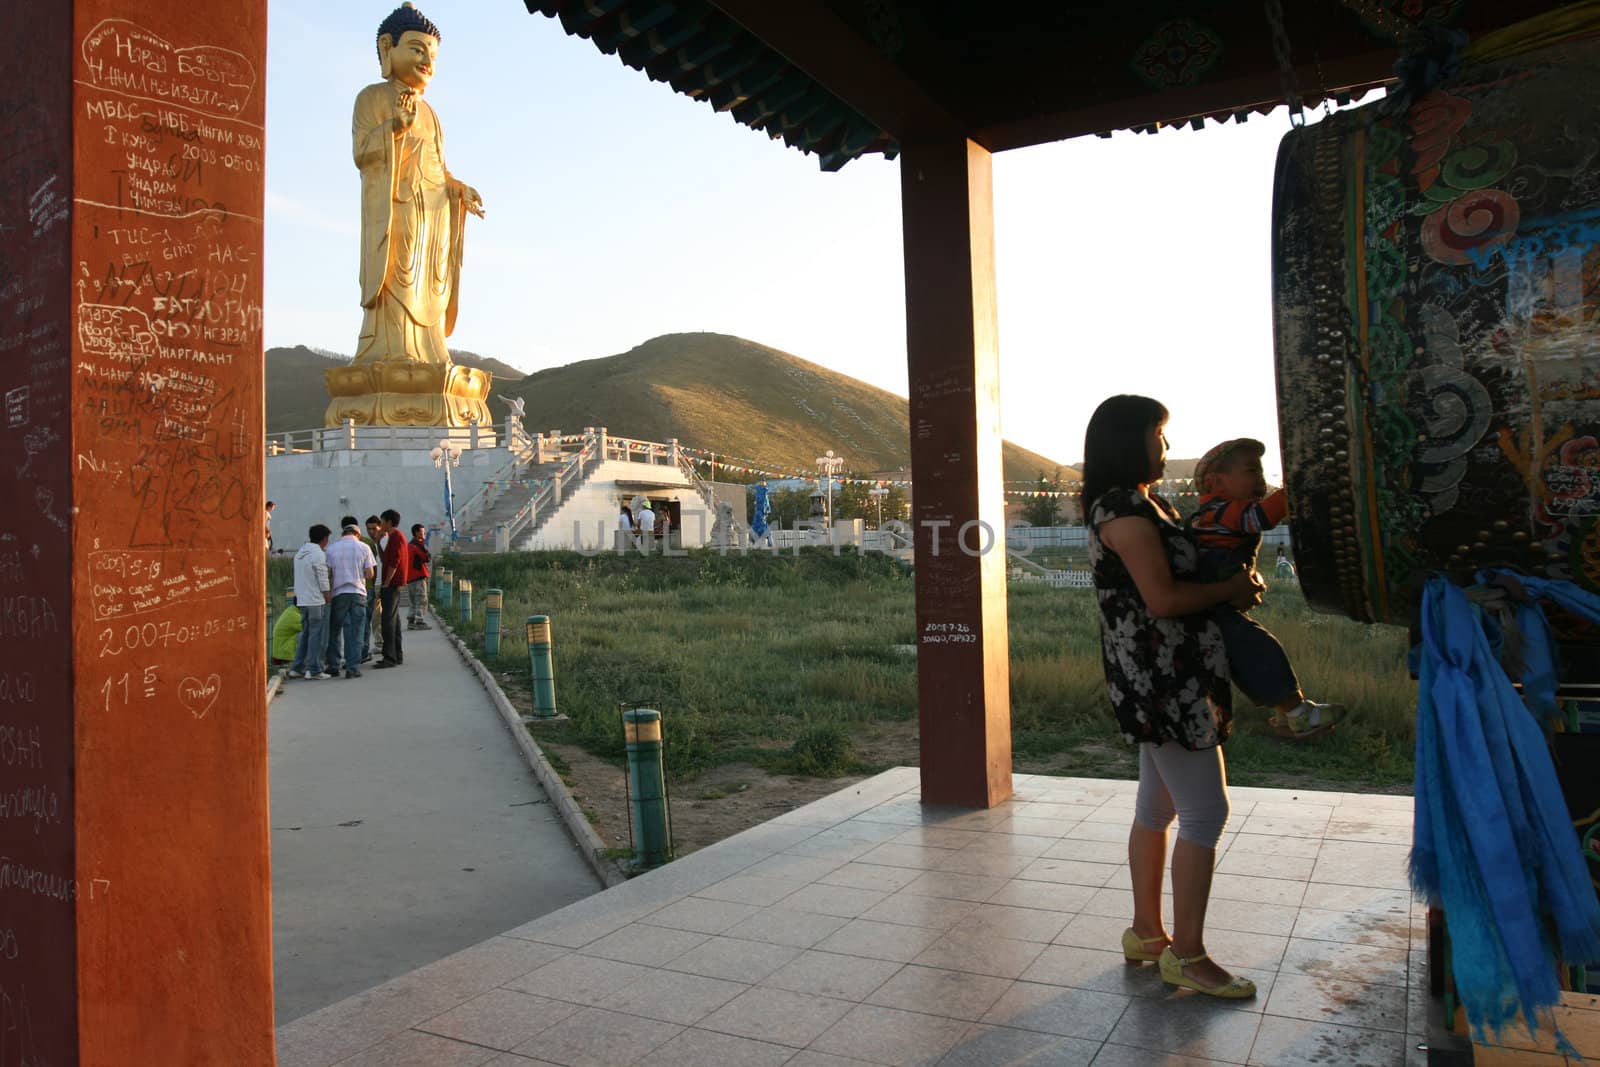 Woman take care a boy on her hand in front of Buddha statue. Ulan Bator . Mongolia. 2008